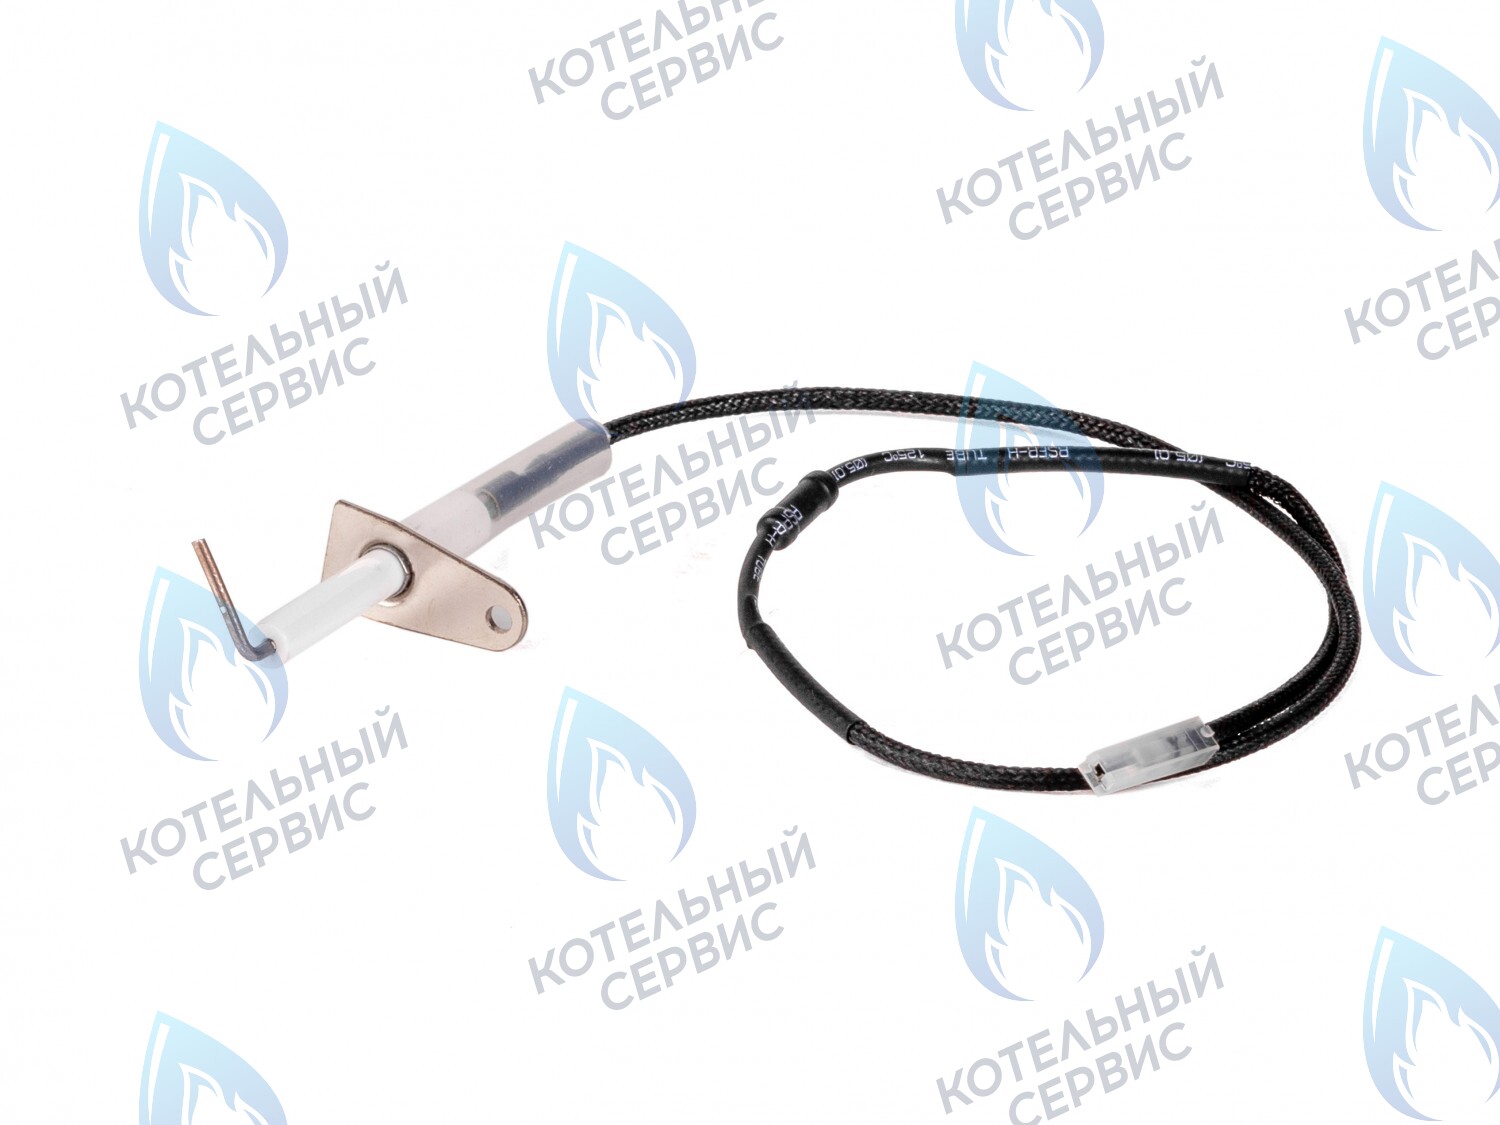 IE010 Электрод розжига и ионизации HAIER F21S(T), F21(T) (F01101, 0530002946), L1P18-F21(M)HEC (F01305, 0530016114) в Казани